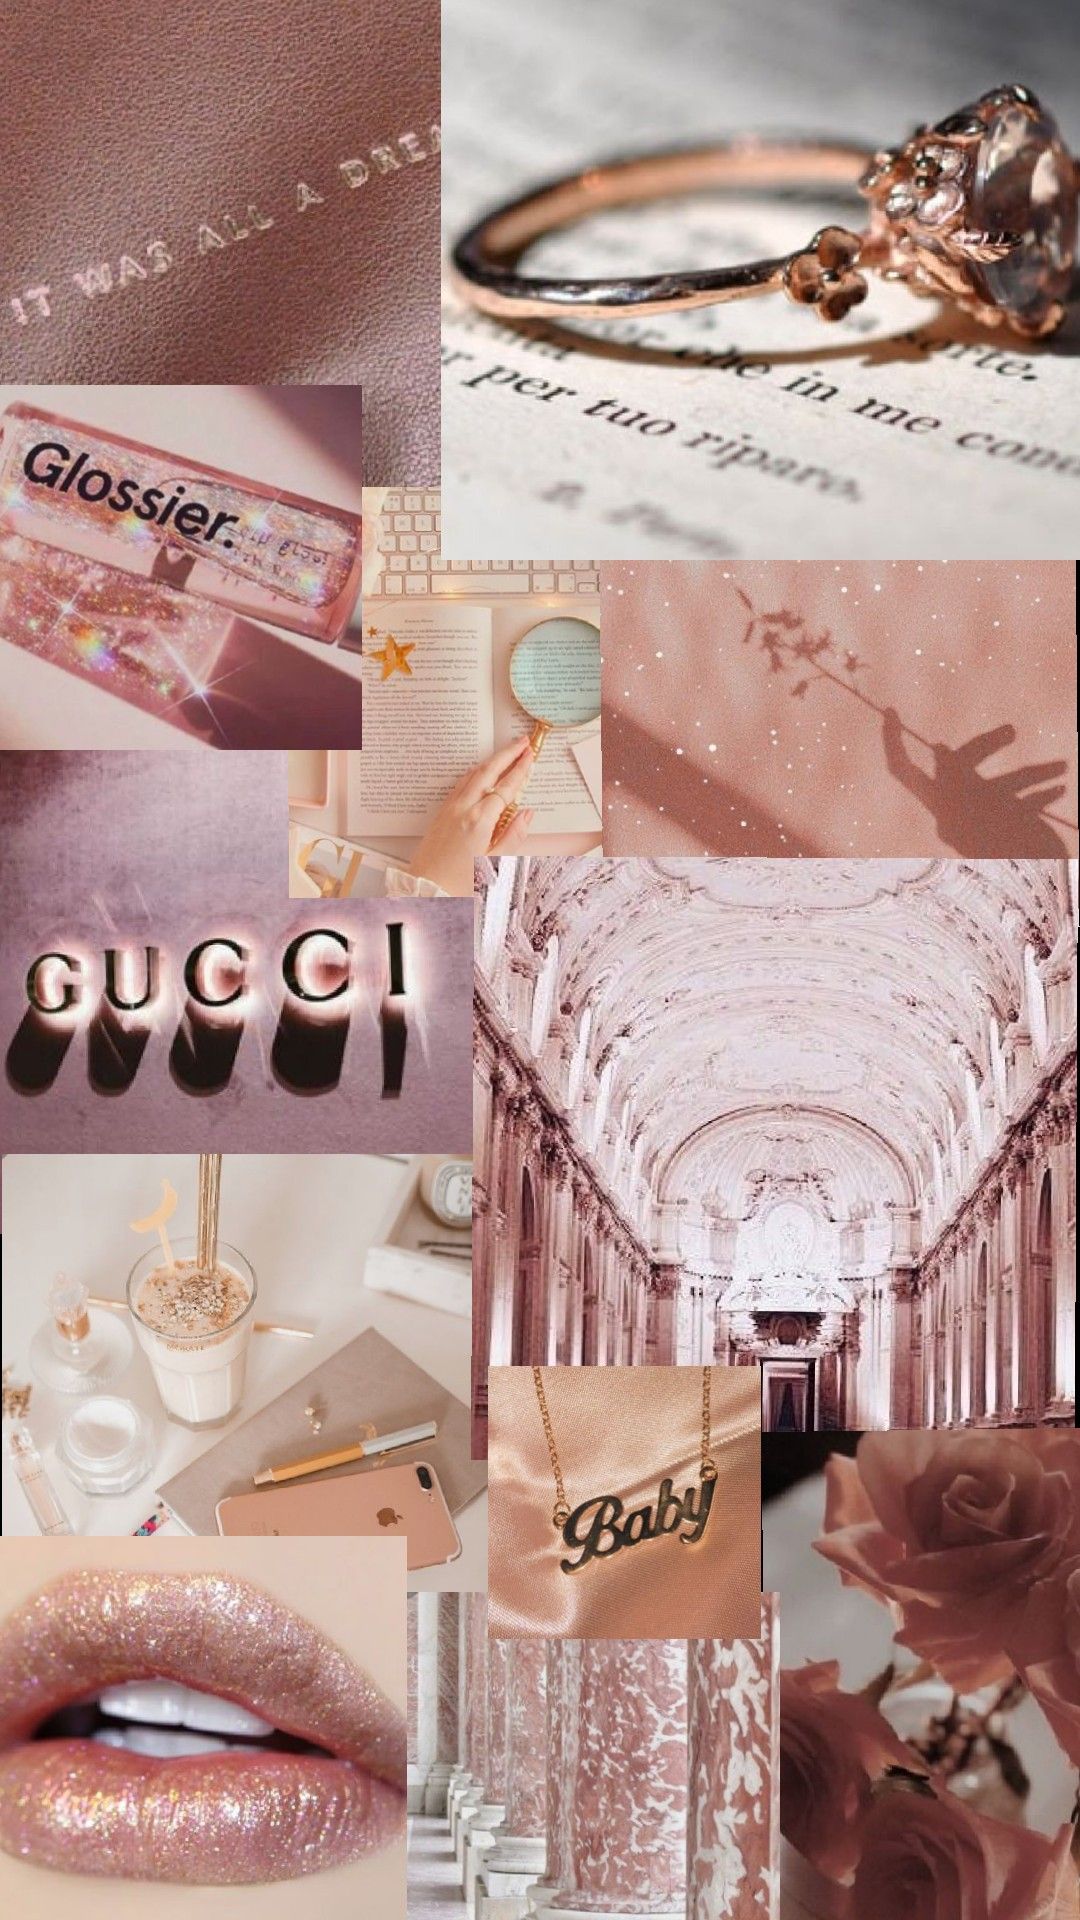 Aesthetic background with pink, gold, and white images - Rose gold